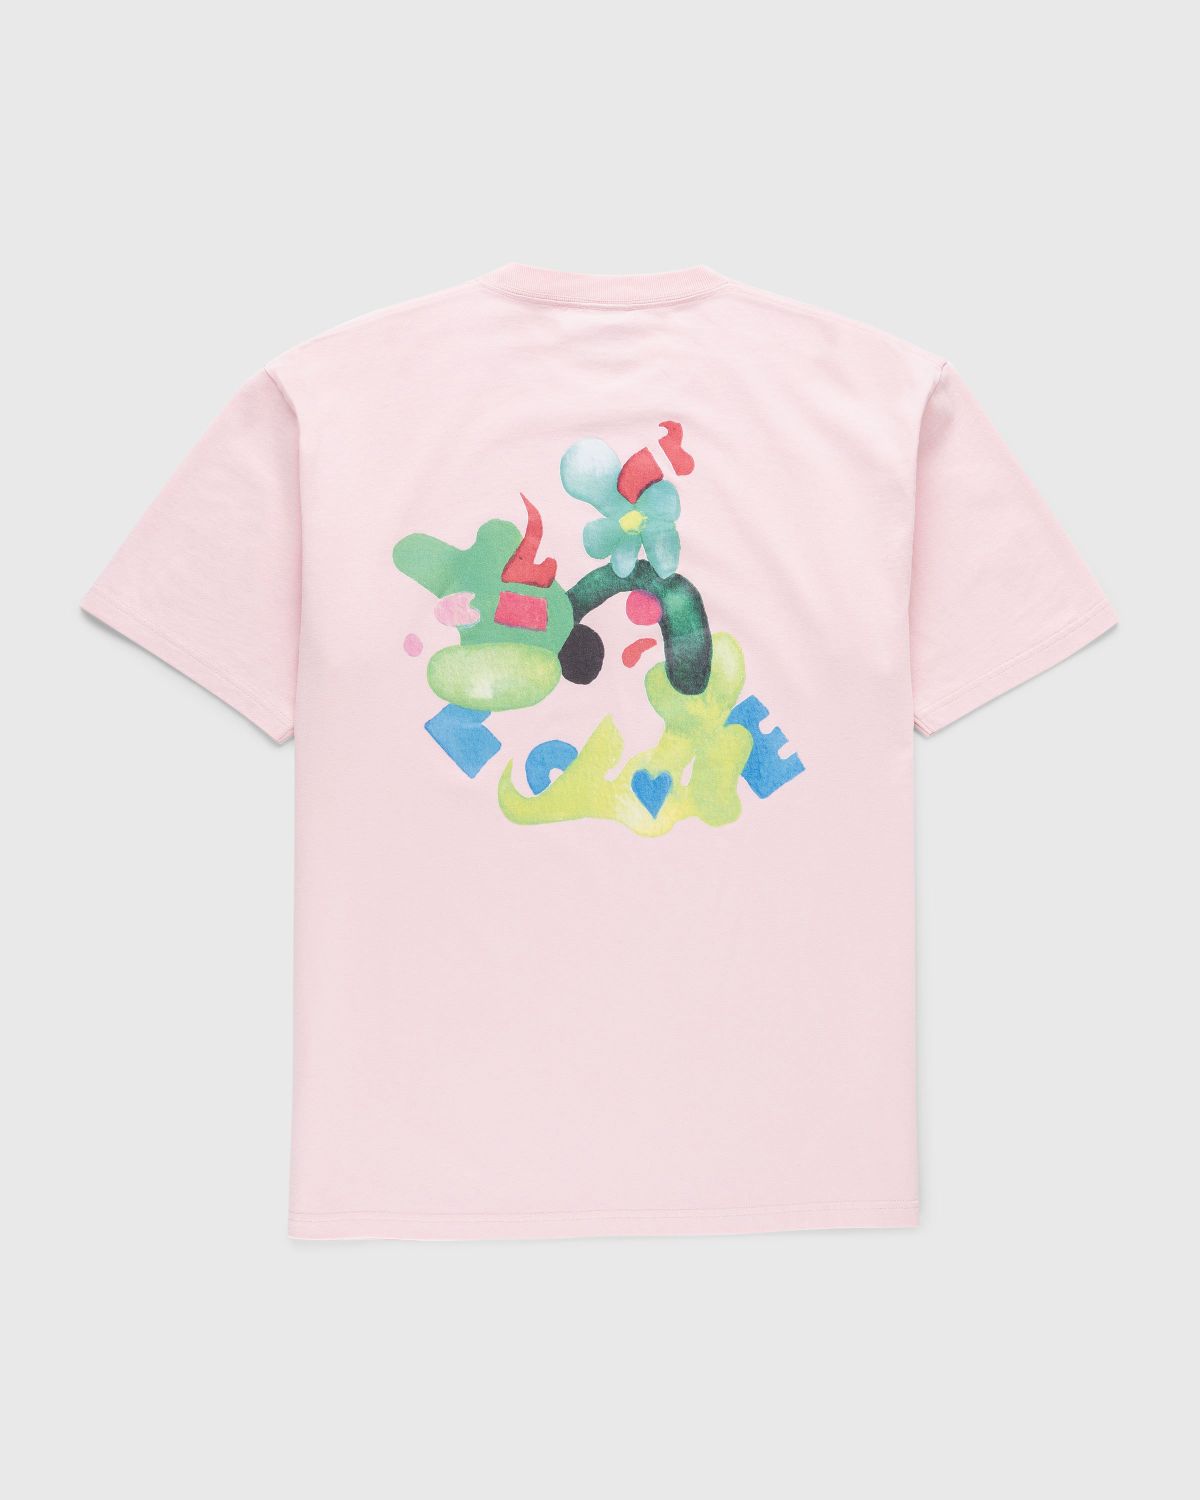 NTS x Highsnobiety – Graphic T-Shirt Pink  - Tops - Pink - Image 1